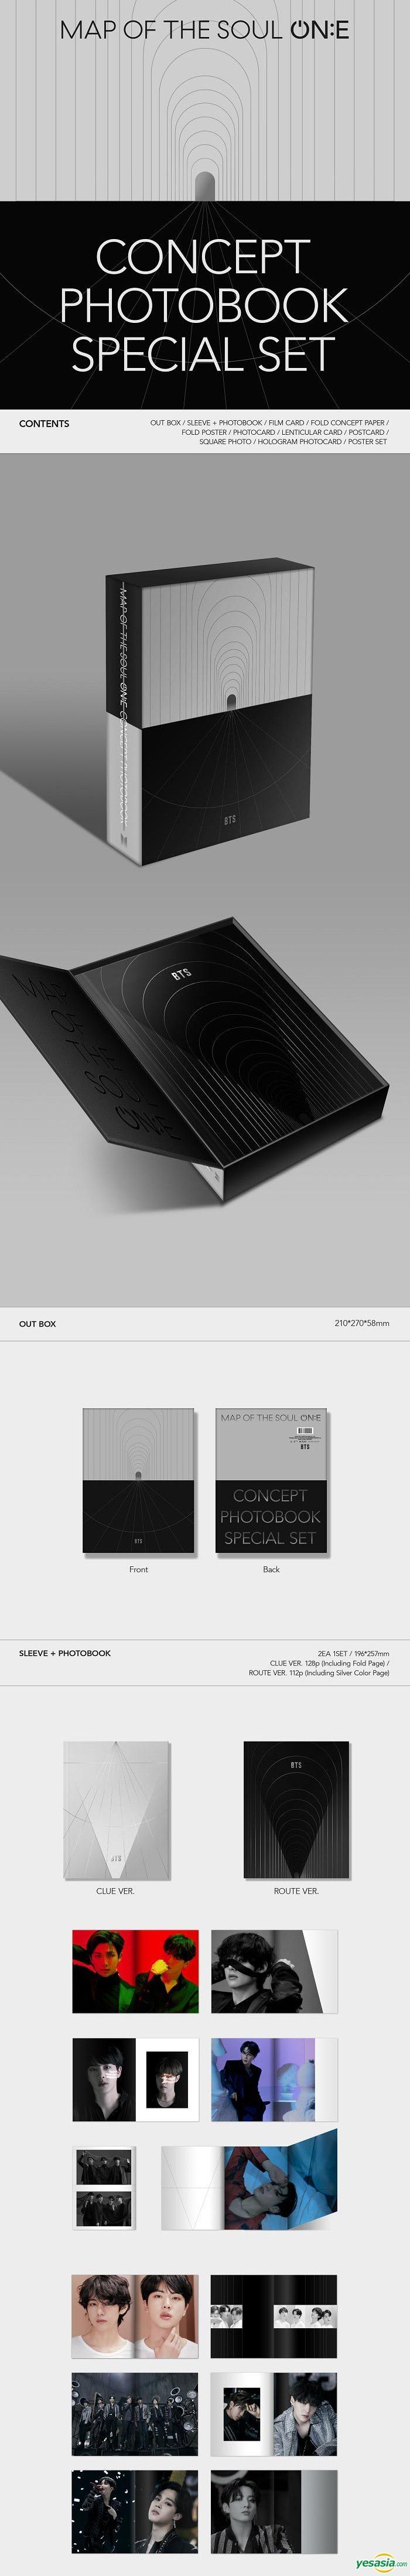 BTS Map of the Soul ONE Concept Photobook Special Set